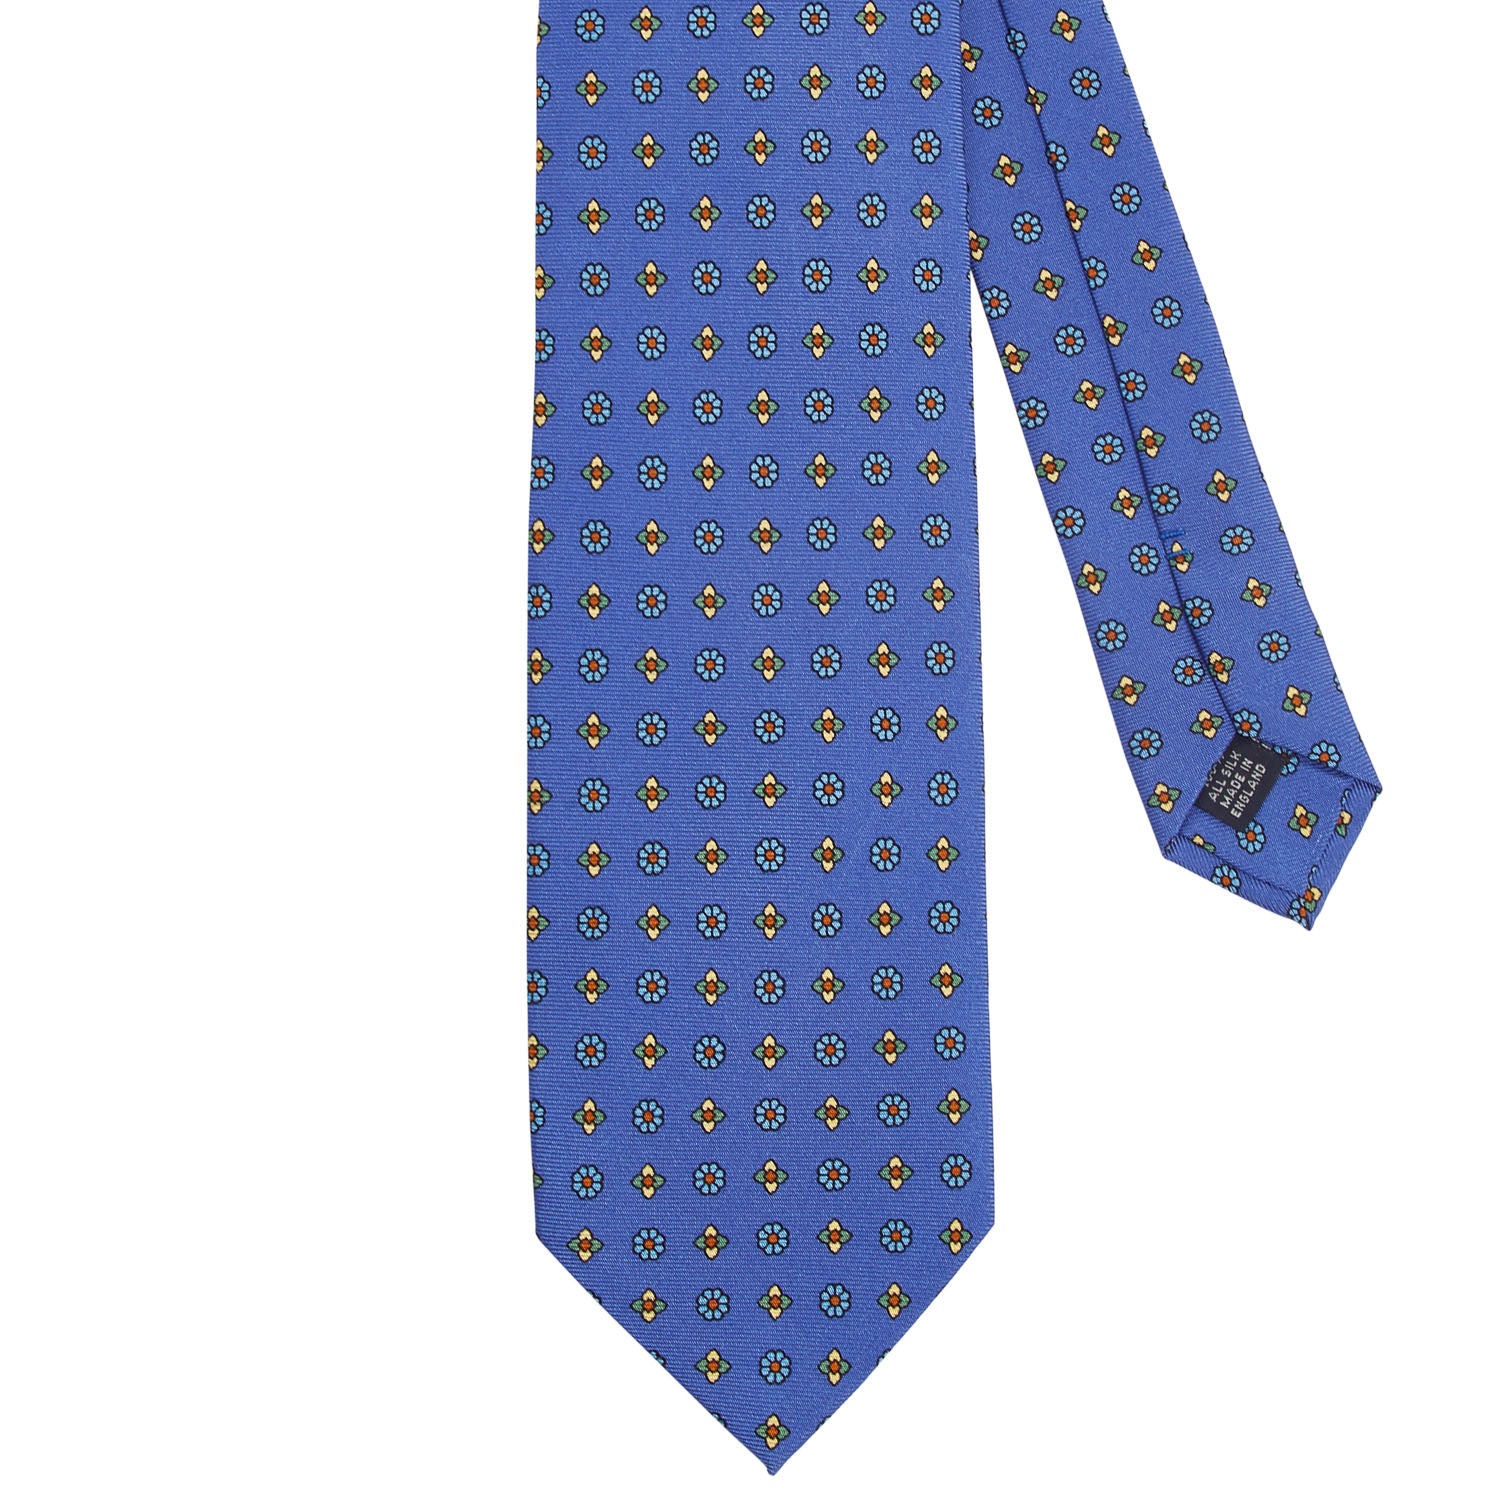 A Sovereign Grade Lido Blue Floral Printed Silk Tie, crafted from 100% English silk by Kirby Allison.com in the United Kingdom.